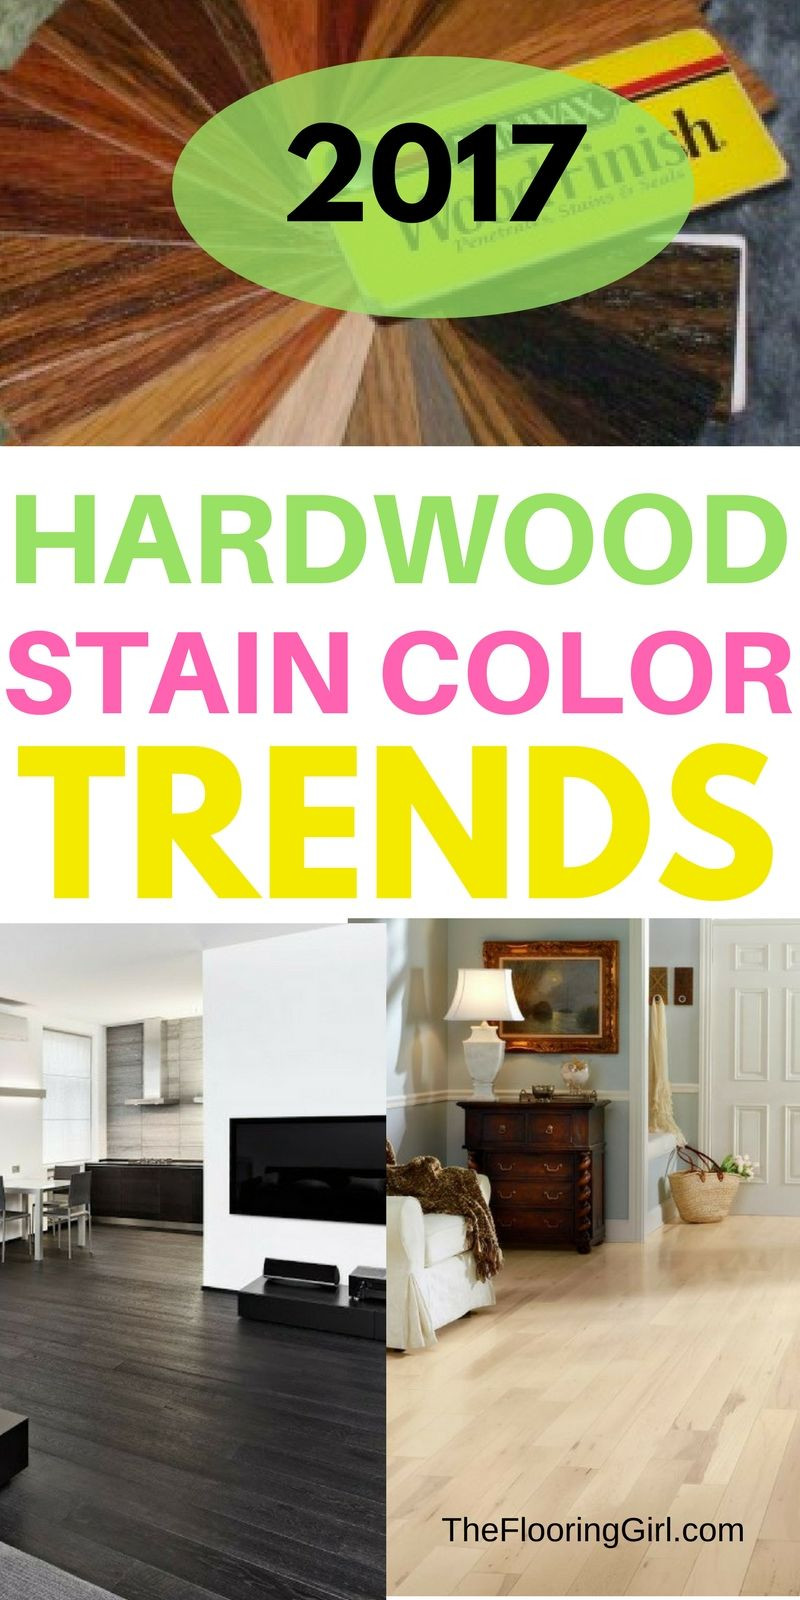 28 Recommended Hardwood Floor Care after Refinishing 2024 free download hardwood floor care after refinishing of hardwood flooring stain color trends 2018 more from the flooring within hardwood flooring stain color trends for 2017 hardwood colors that are in sty